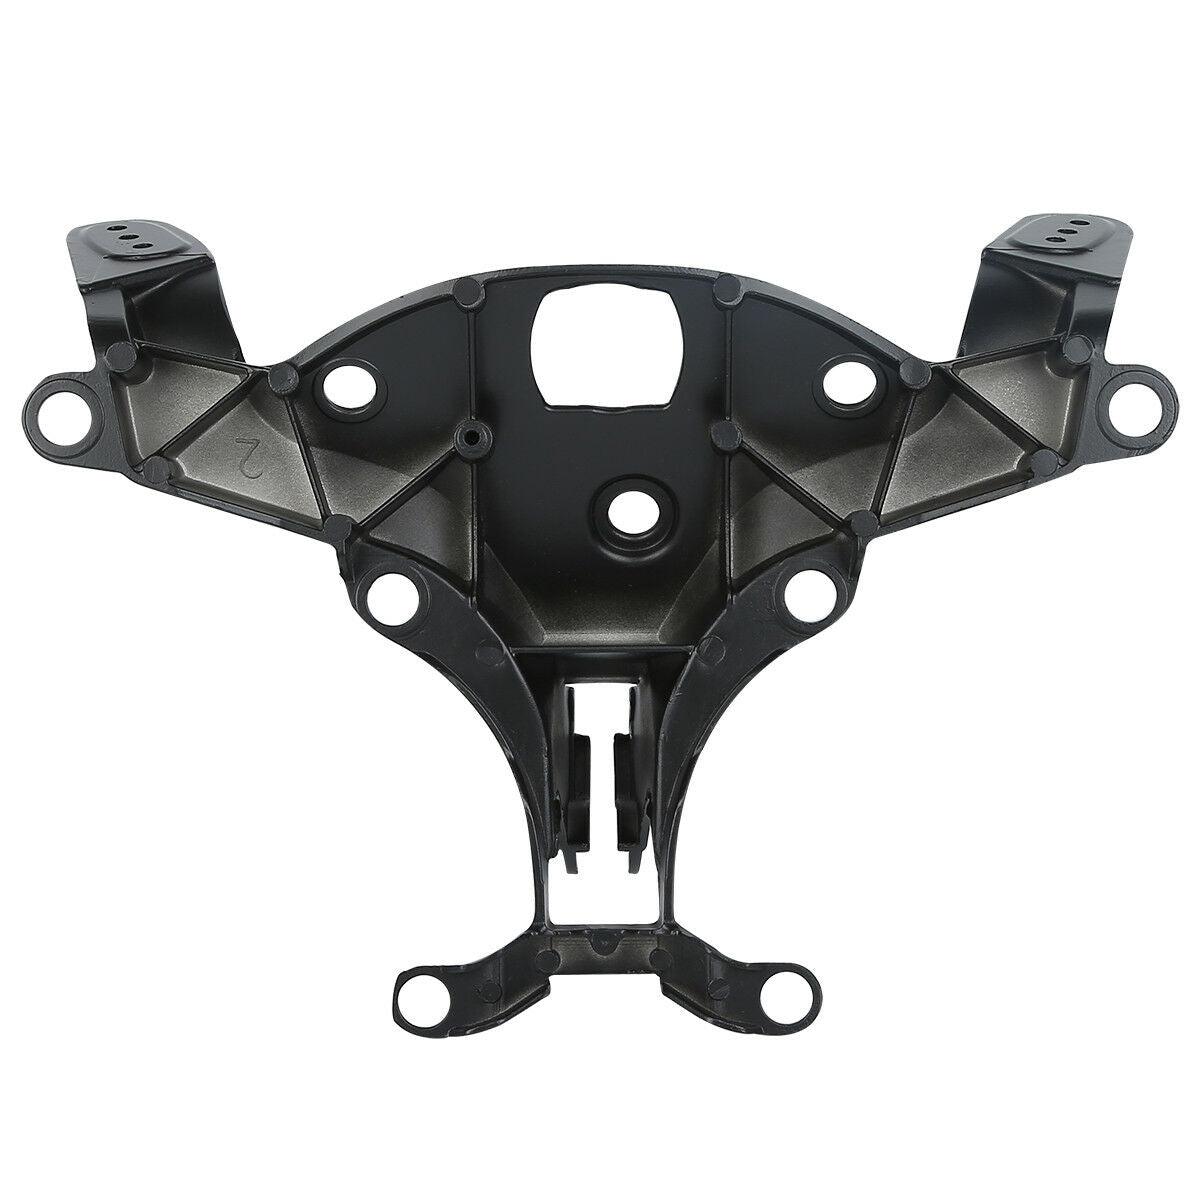 Front Fairing Cowl Stay Headlight Bracket Fit For 07-08 YAMAHA YZF R1 YZFR1 New - Moto Life Products